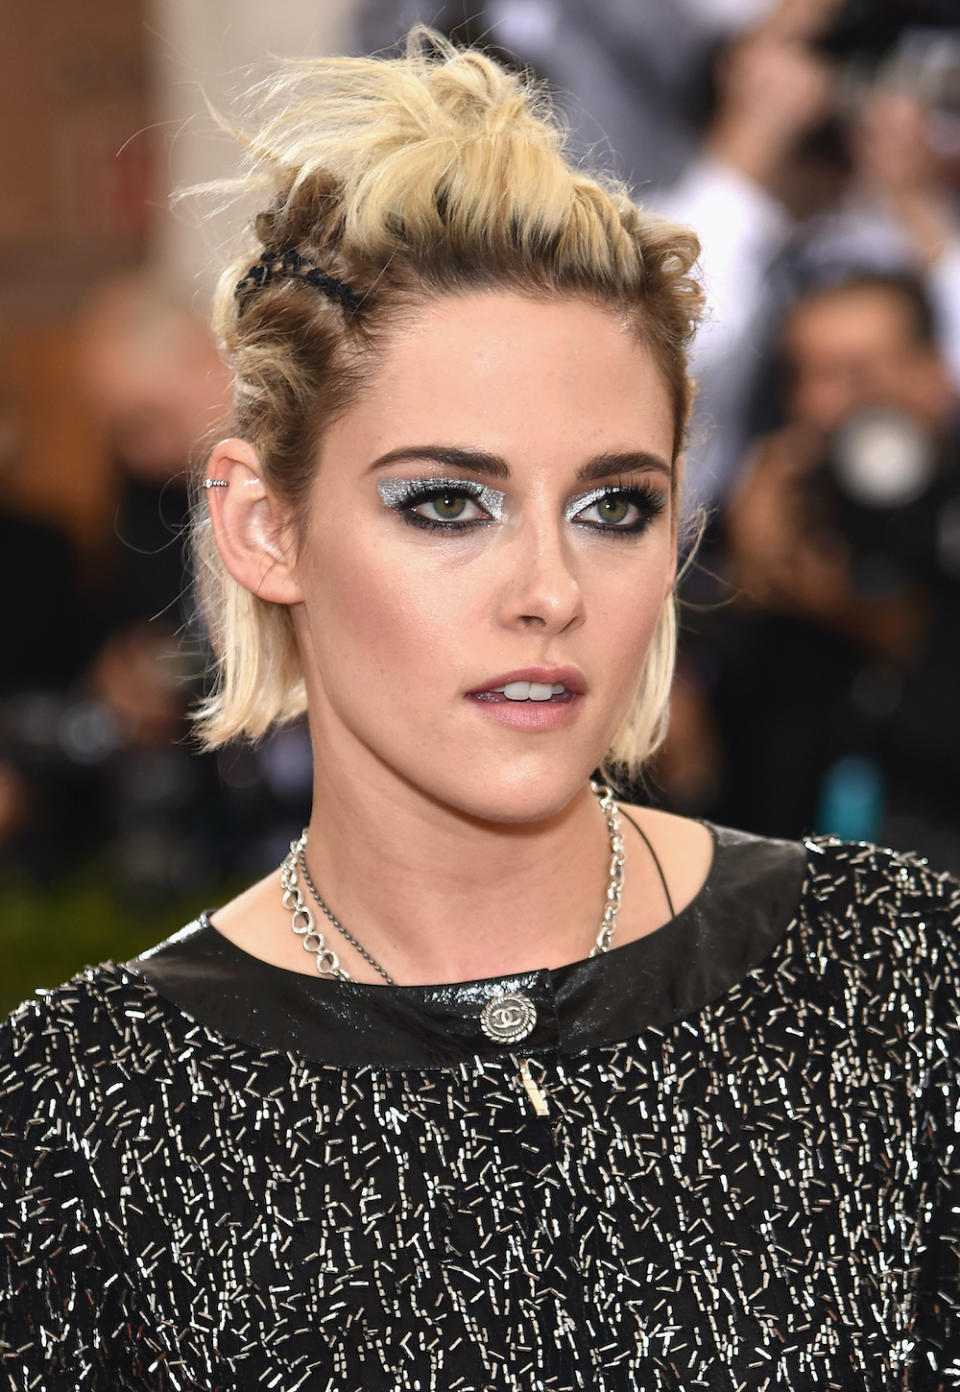 <p> Kristen Stewart knows how to work a grungey make-up look and her ensemble for the 2016 Met Gala was no exception. Her smudgy liner was paired with geometric silver eyeshadow were a real statement, making for a truly standout creation. </p>